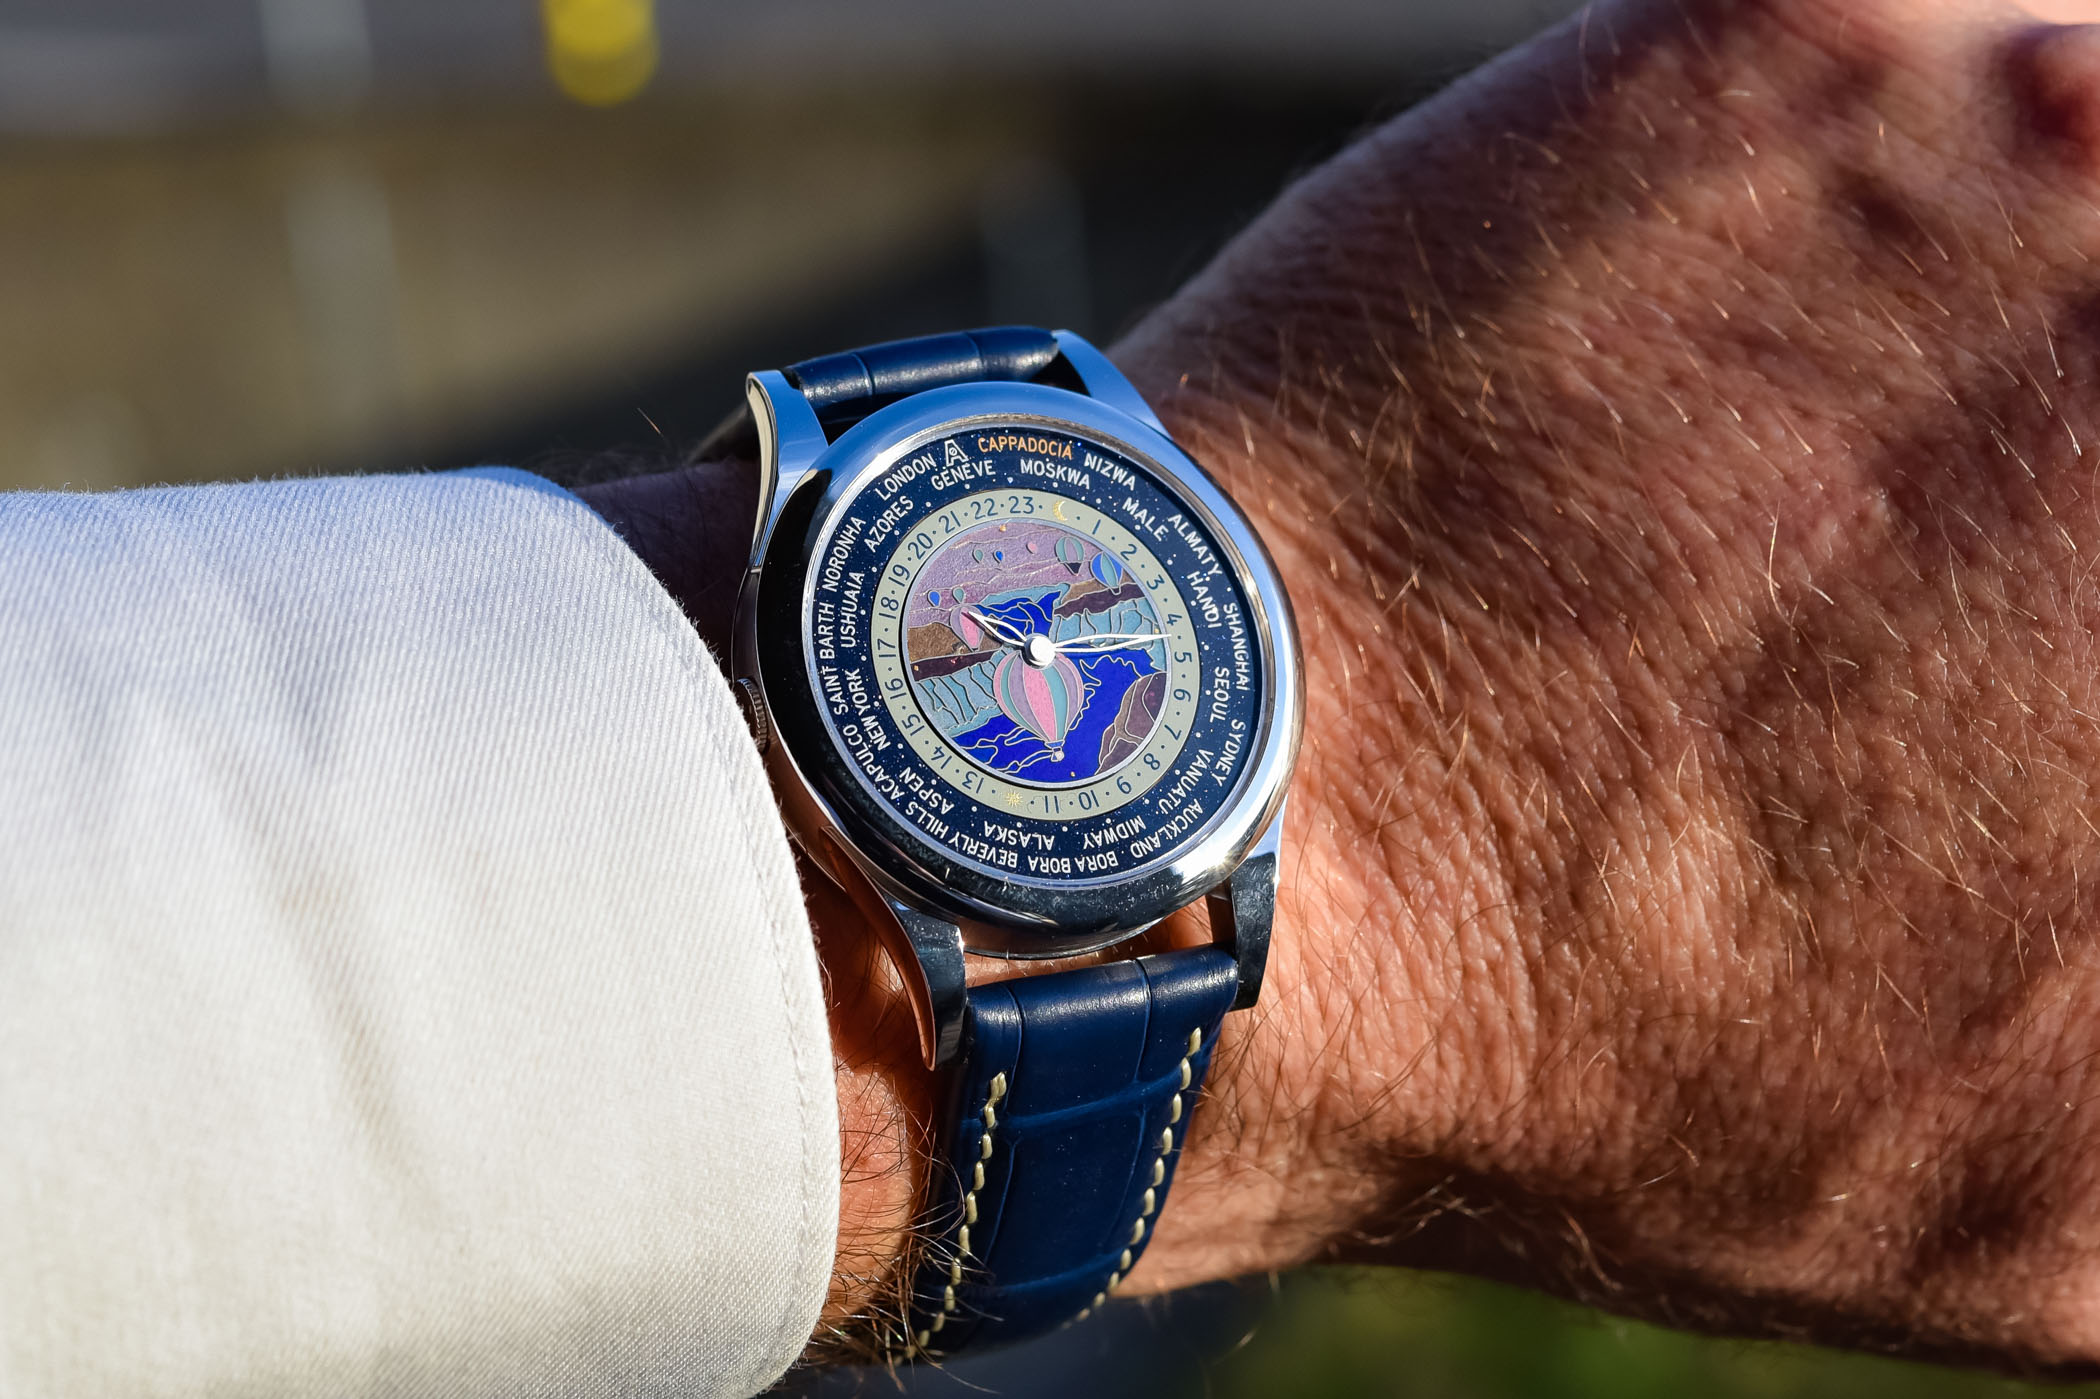 BCHH x Andersen Geneve Celestial Voyager Sunset over Cappadocia World Time